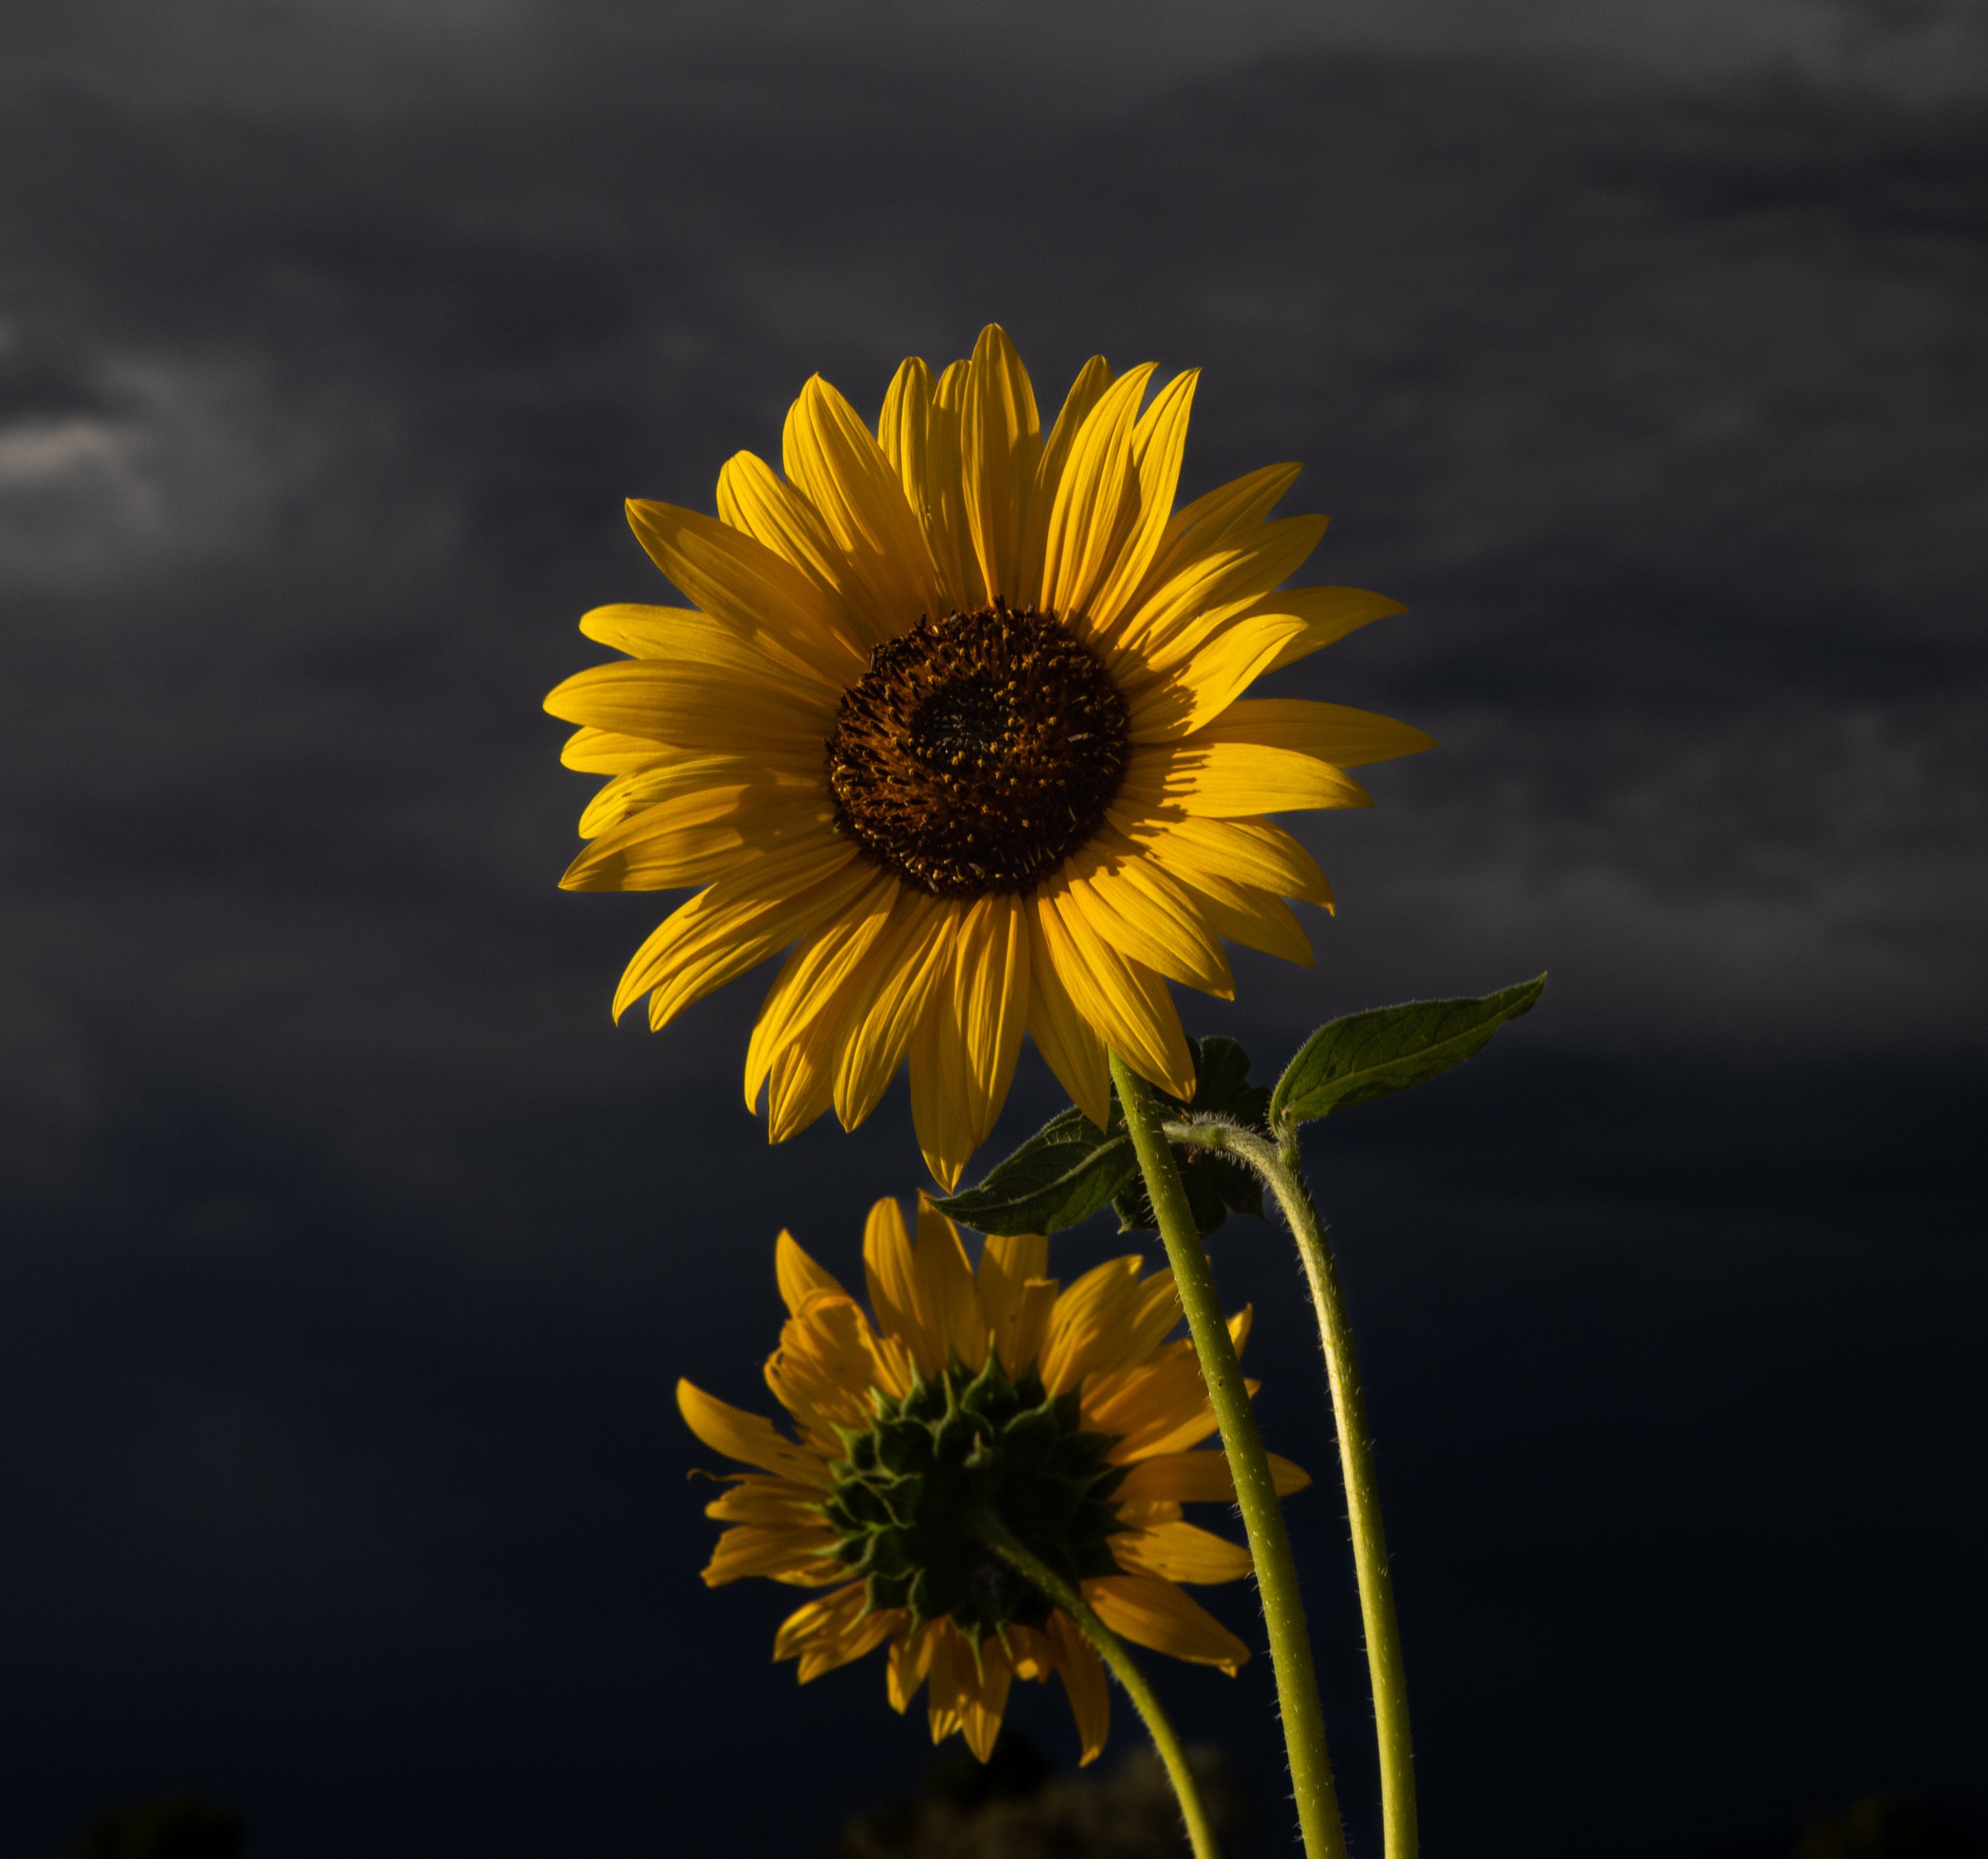 Sunflowers, Taos, New Mexico